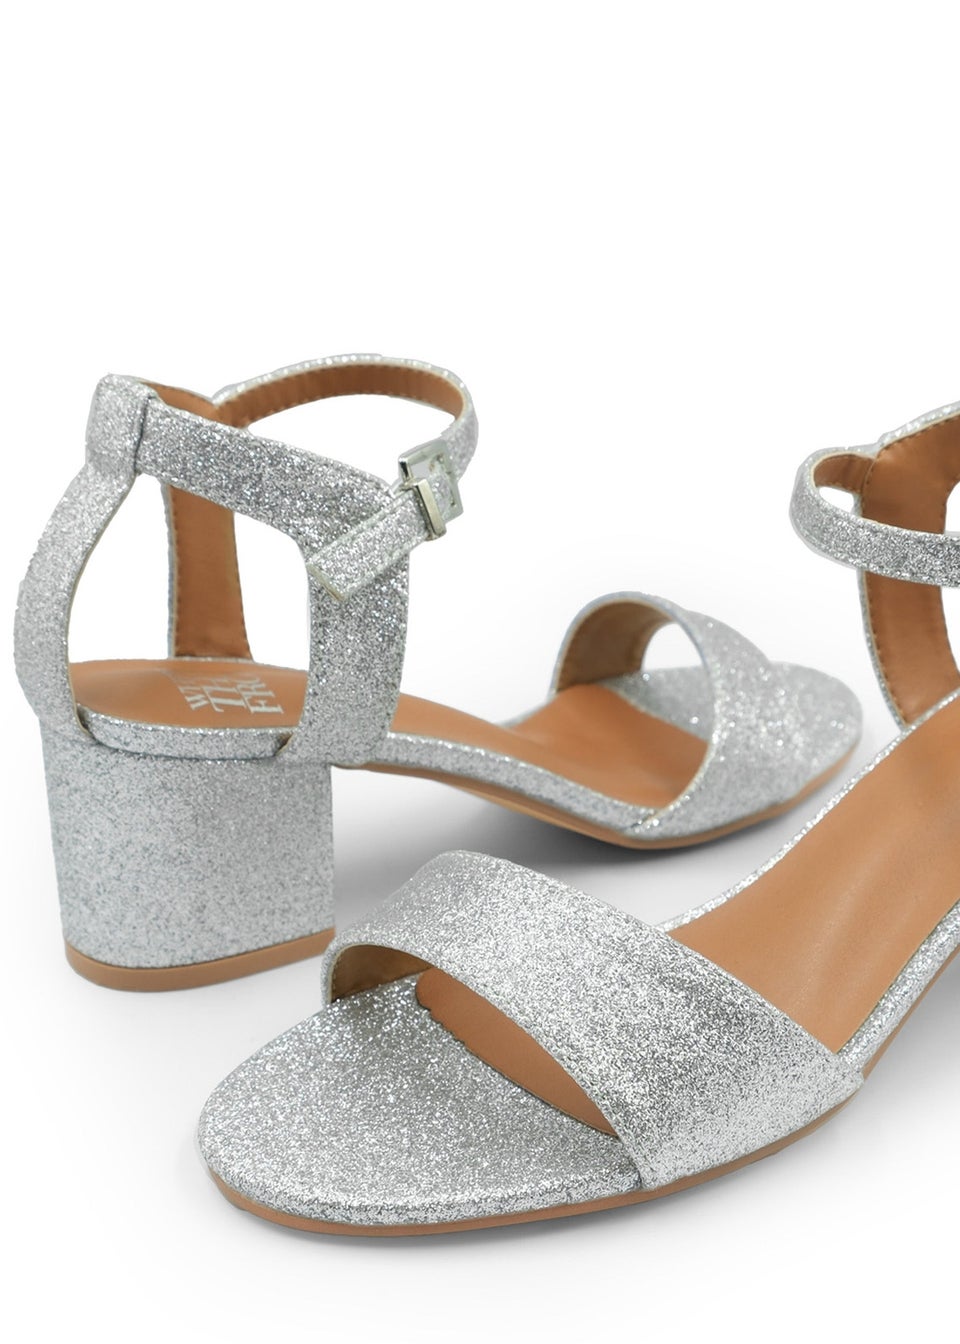 Where's That From Silver Adrianna Wide Fit Glitter Strappy Heels